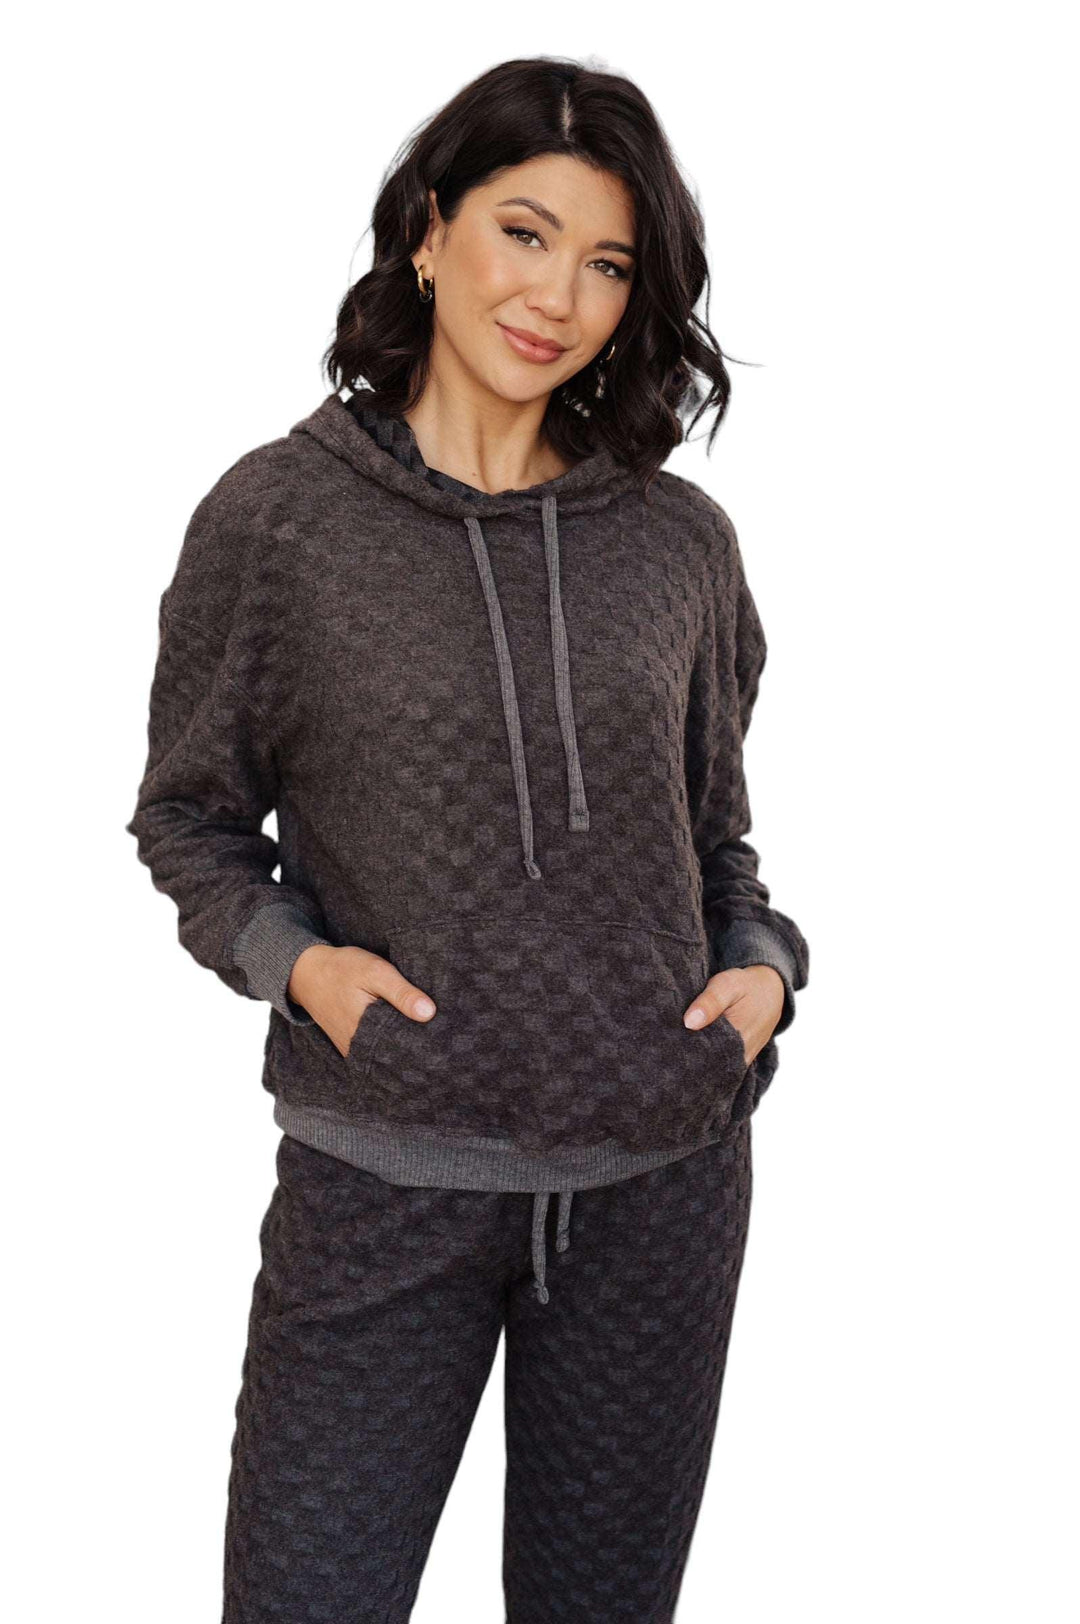 Checkered Hooded Top and Pants Loungewear Set Small Charcoal Grey Pants Sets